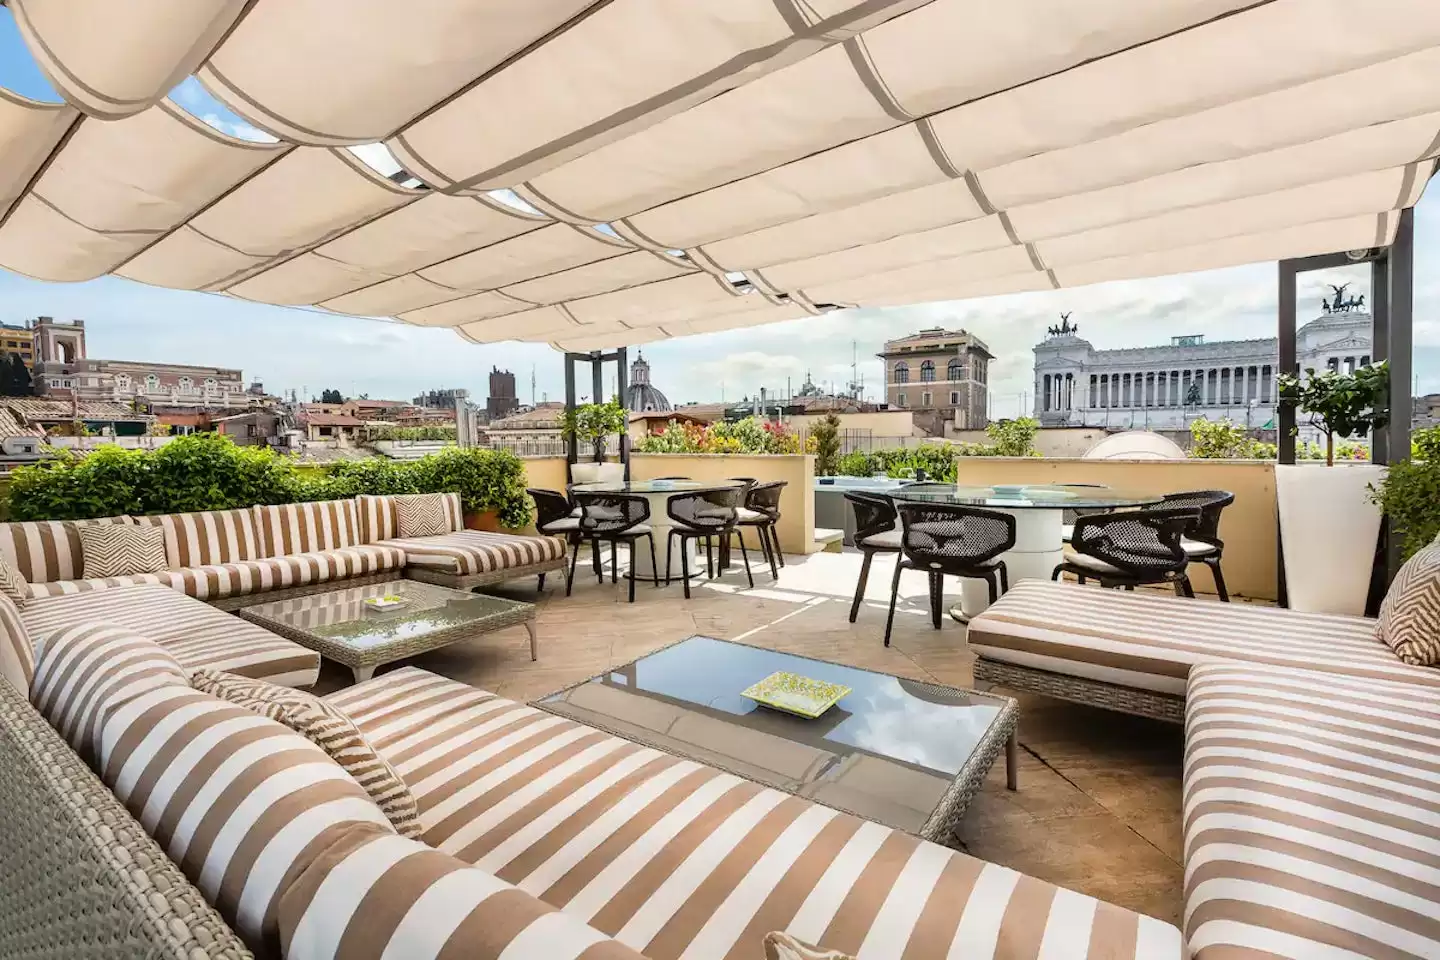 BEST HOTELS Near the Trevi Fountain in Rome - Three Coins in the Fountain Apartment - Terrace with view of il Vittoriano